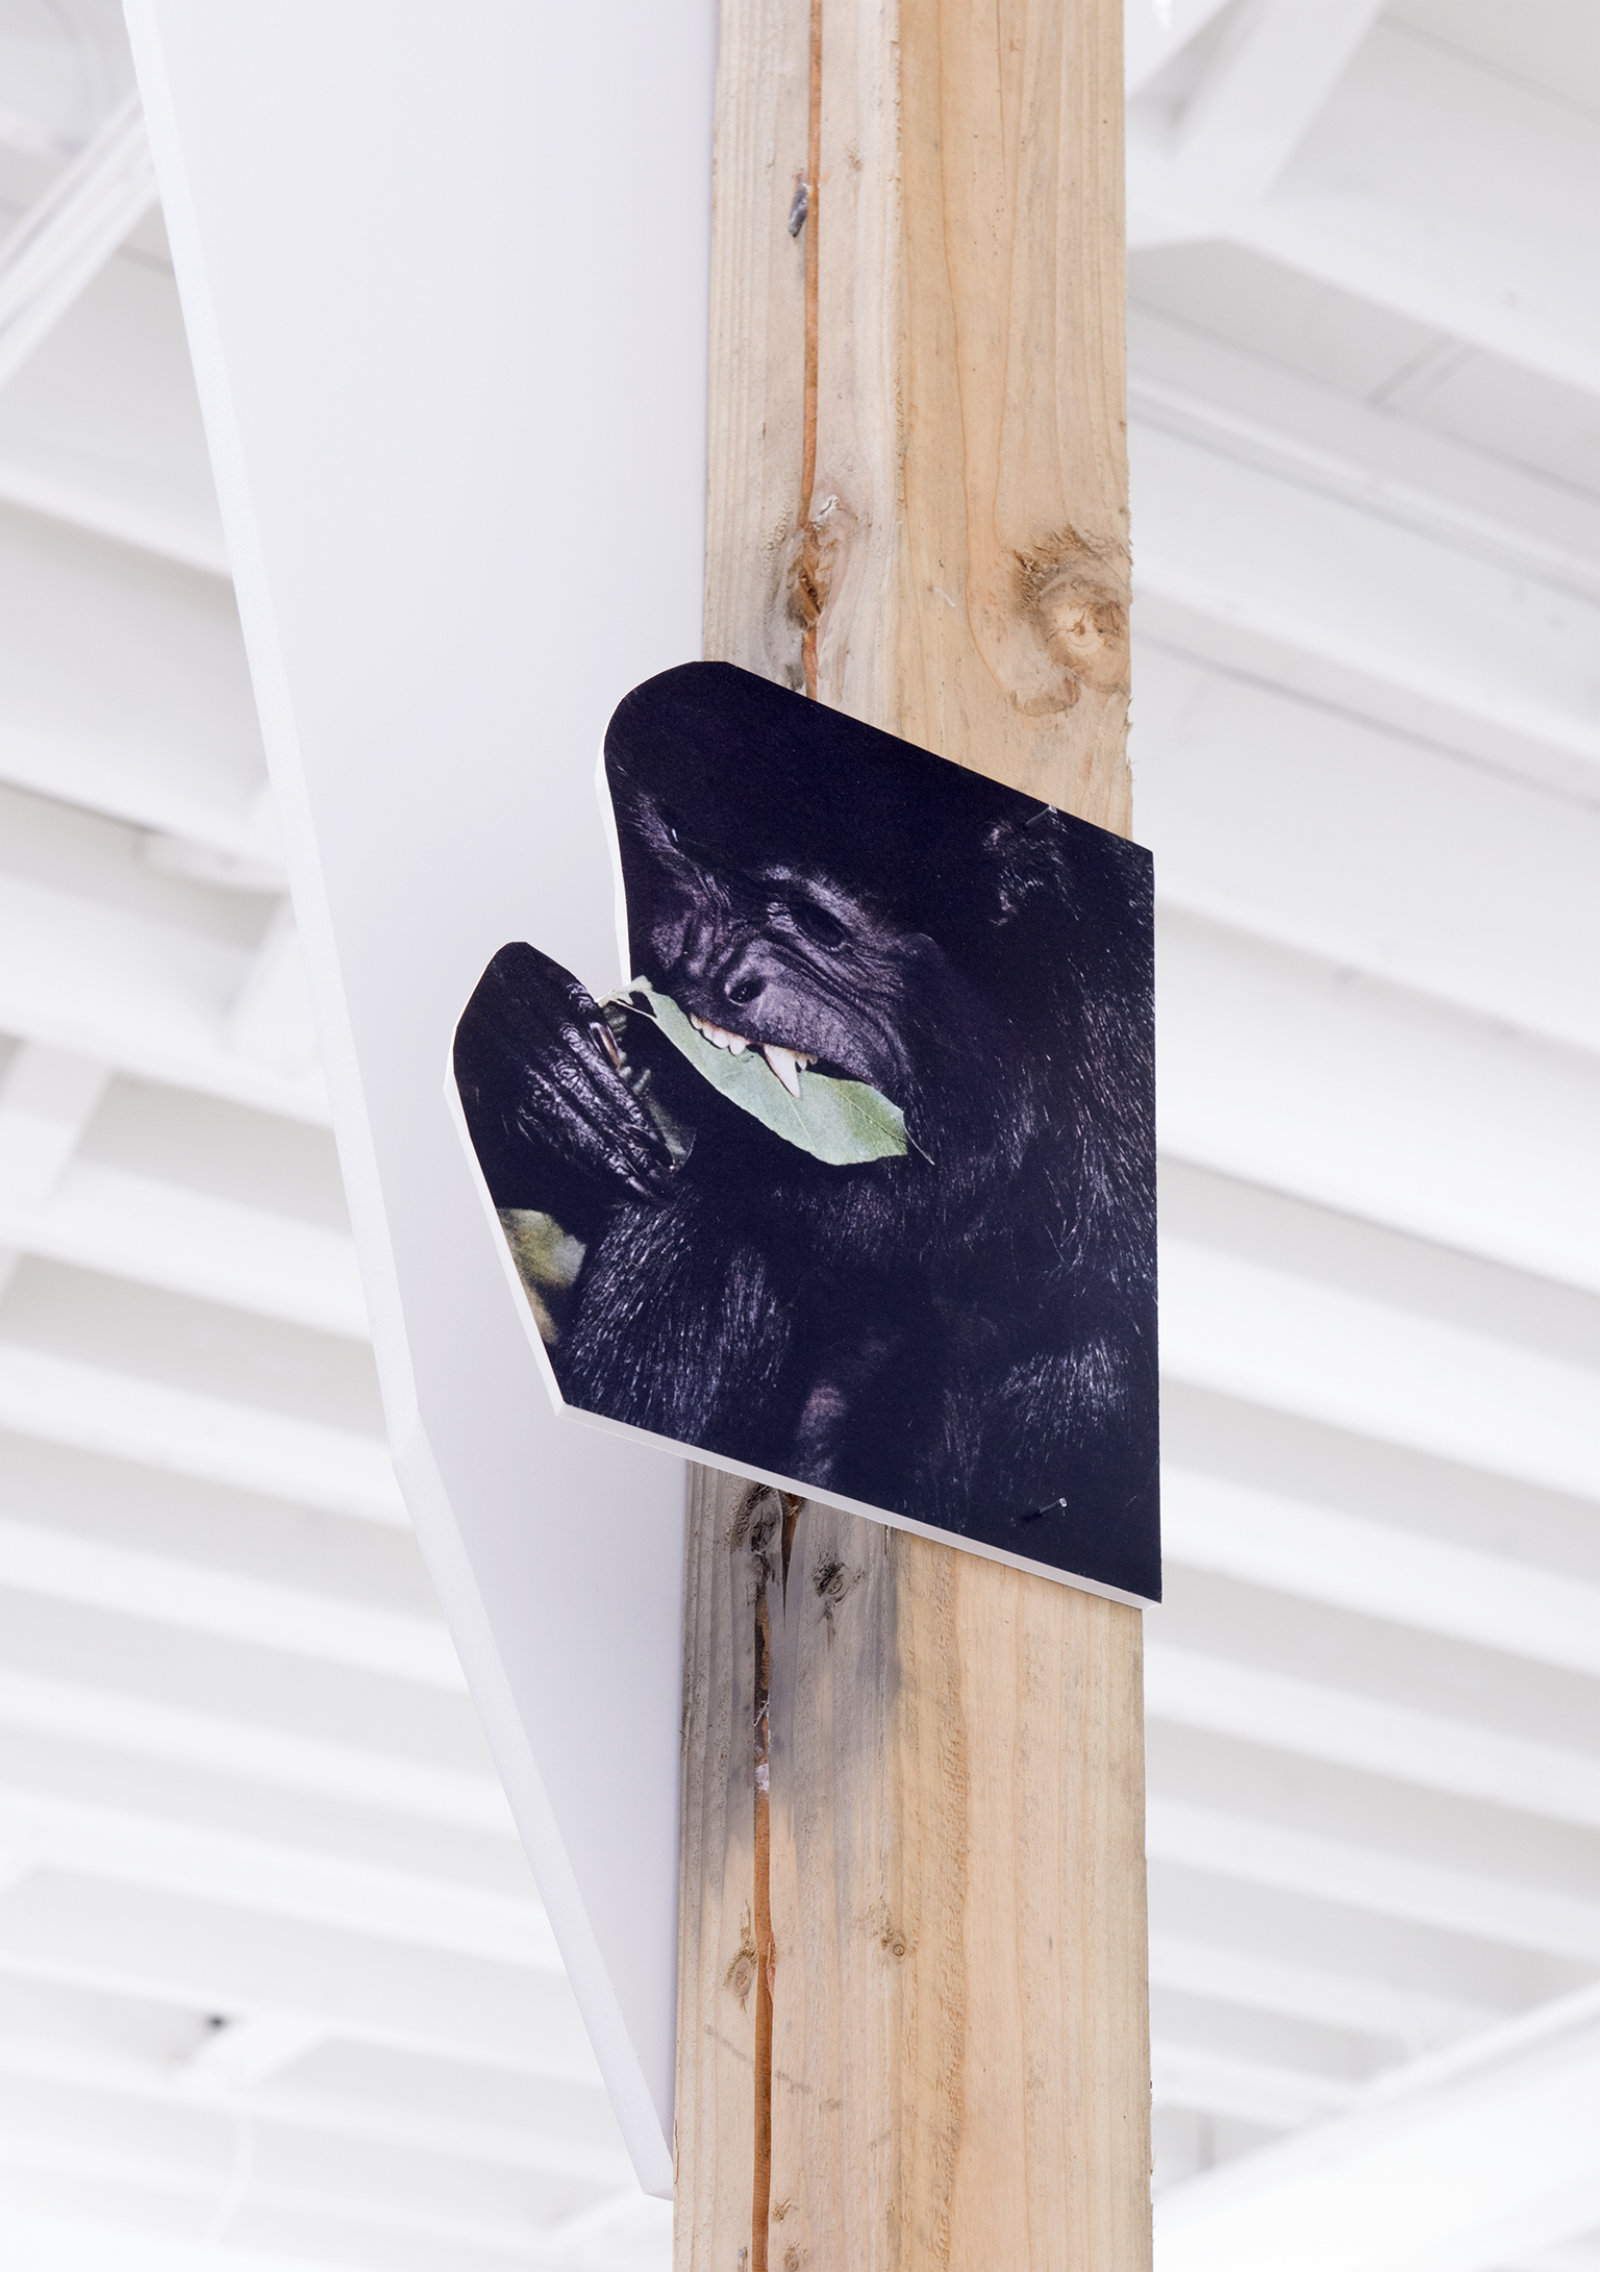 Geoffrey Farmer, In the dark pool the grass grows. In the grass there is night. Hold tight, and climb the tree, eating leaves then leap! (detail), 2014, douglas fir pole, 6 photographs mounted on foamcore, 200 x 4 x 4 in. (508 x 9 x 9 cm)